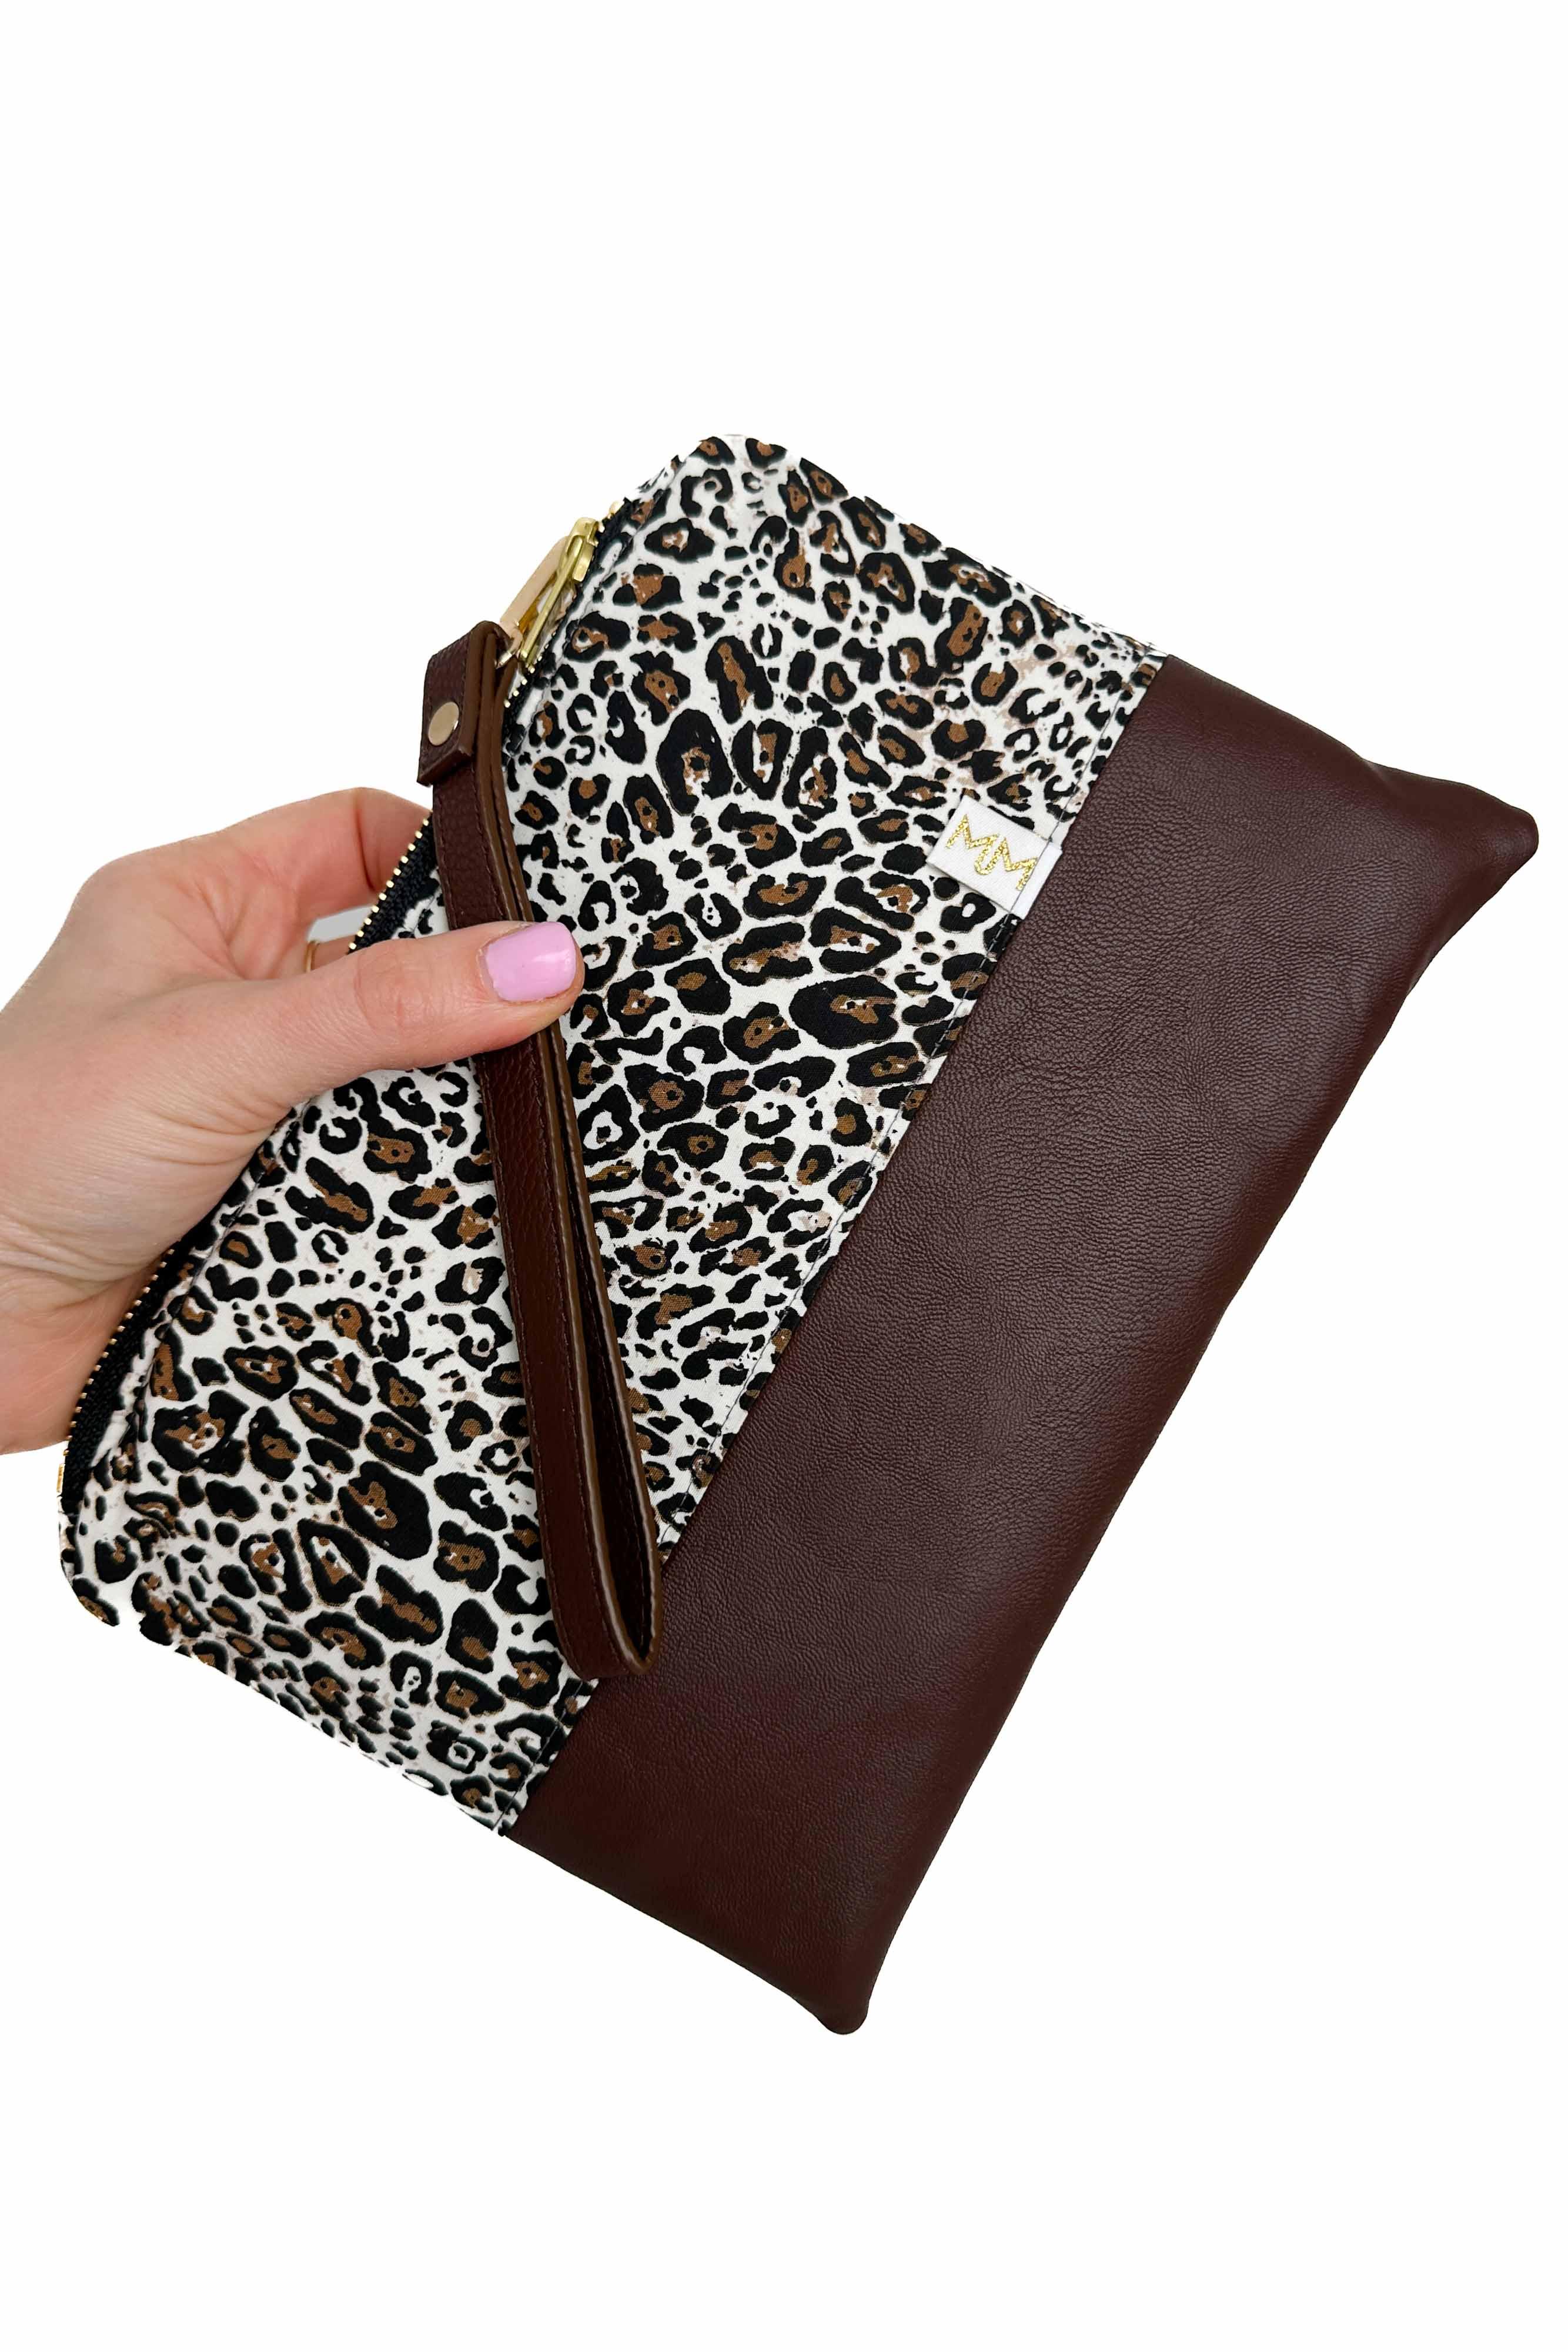 Panthera Convertible Crossbody Wristlet+ with Compartments READY TO SHIP - Modern Makerie